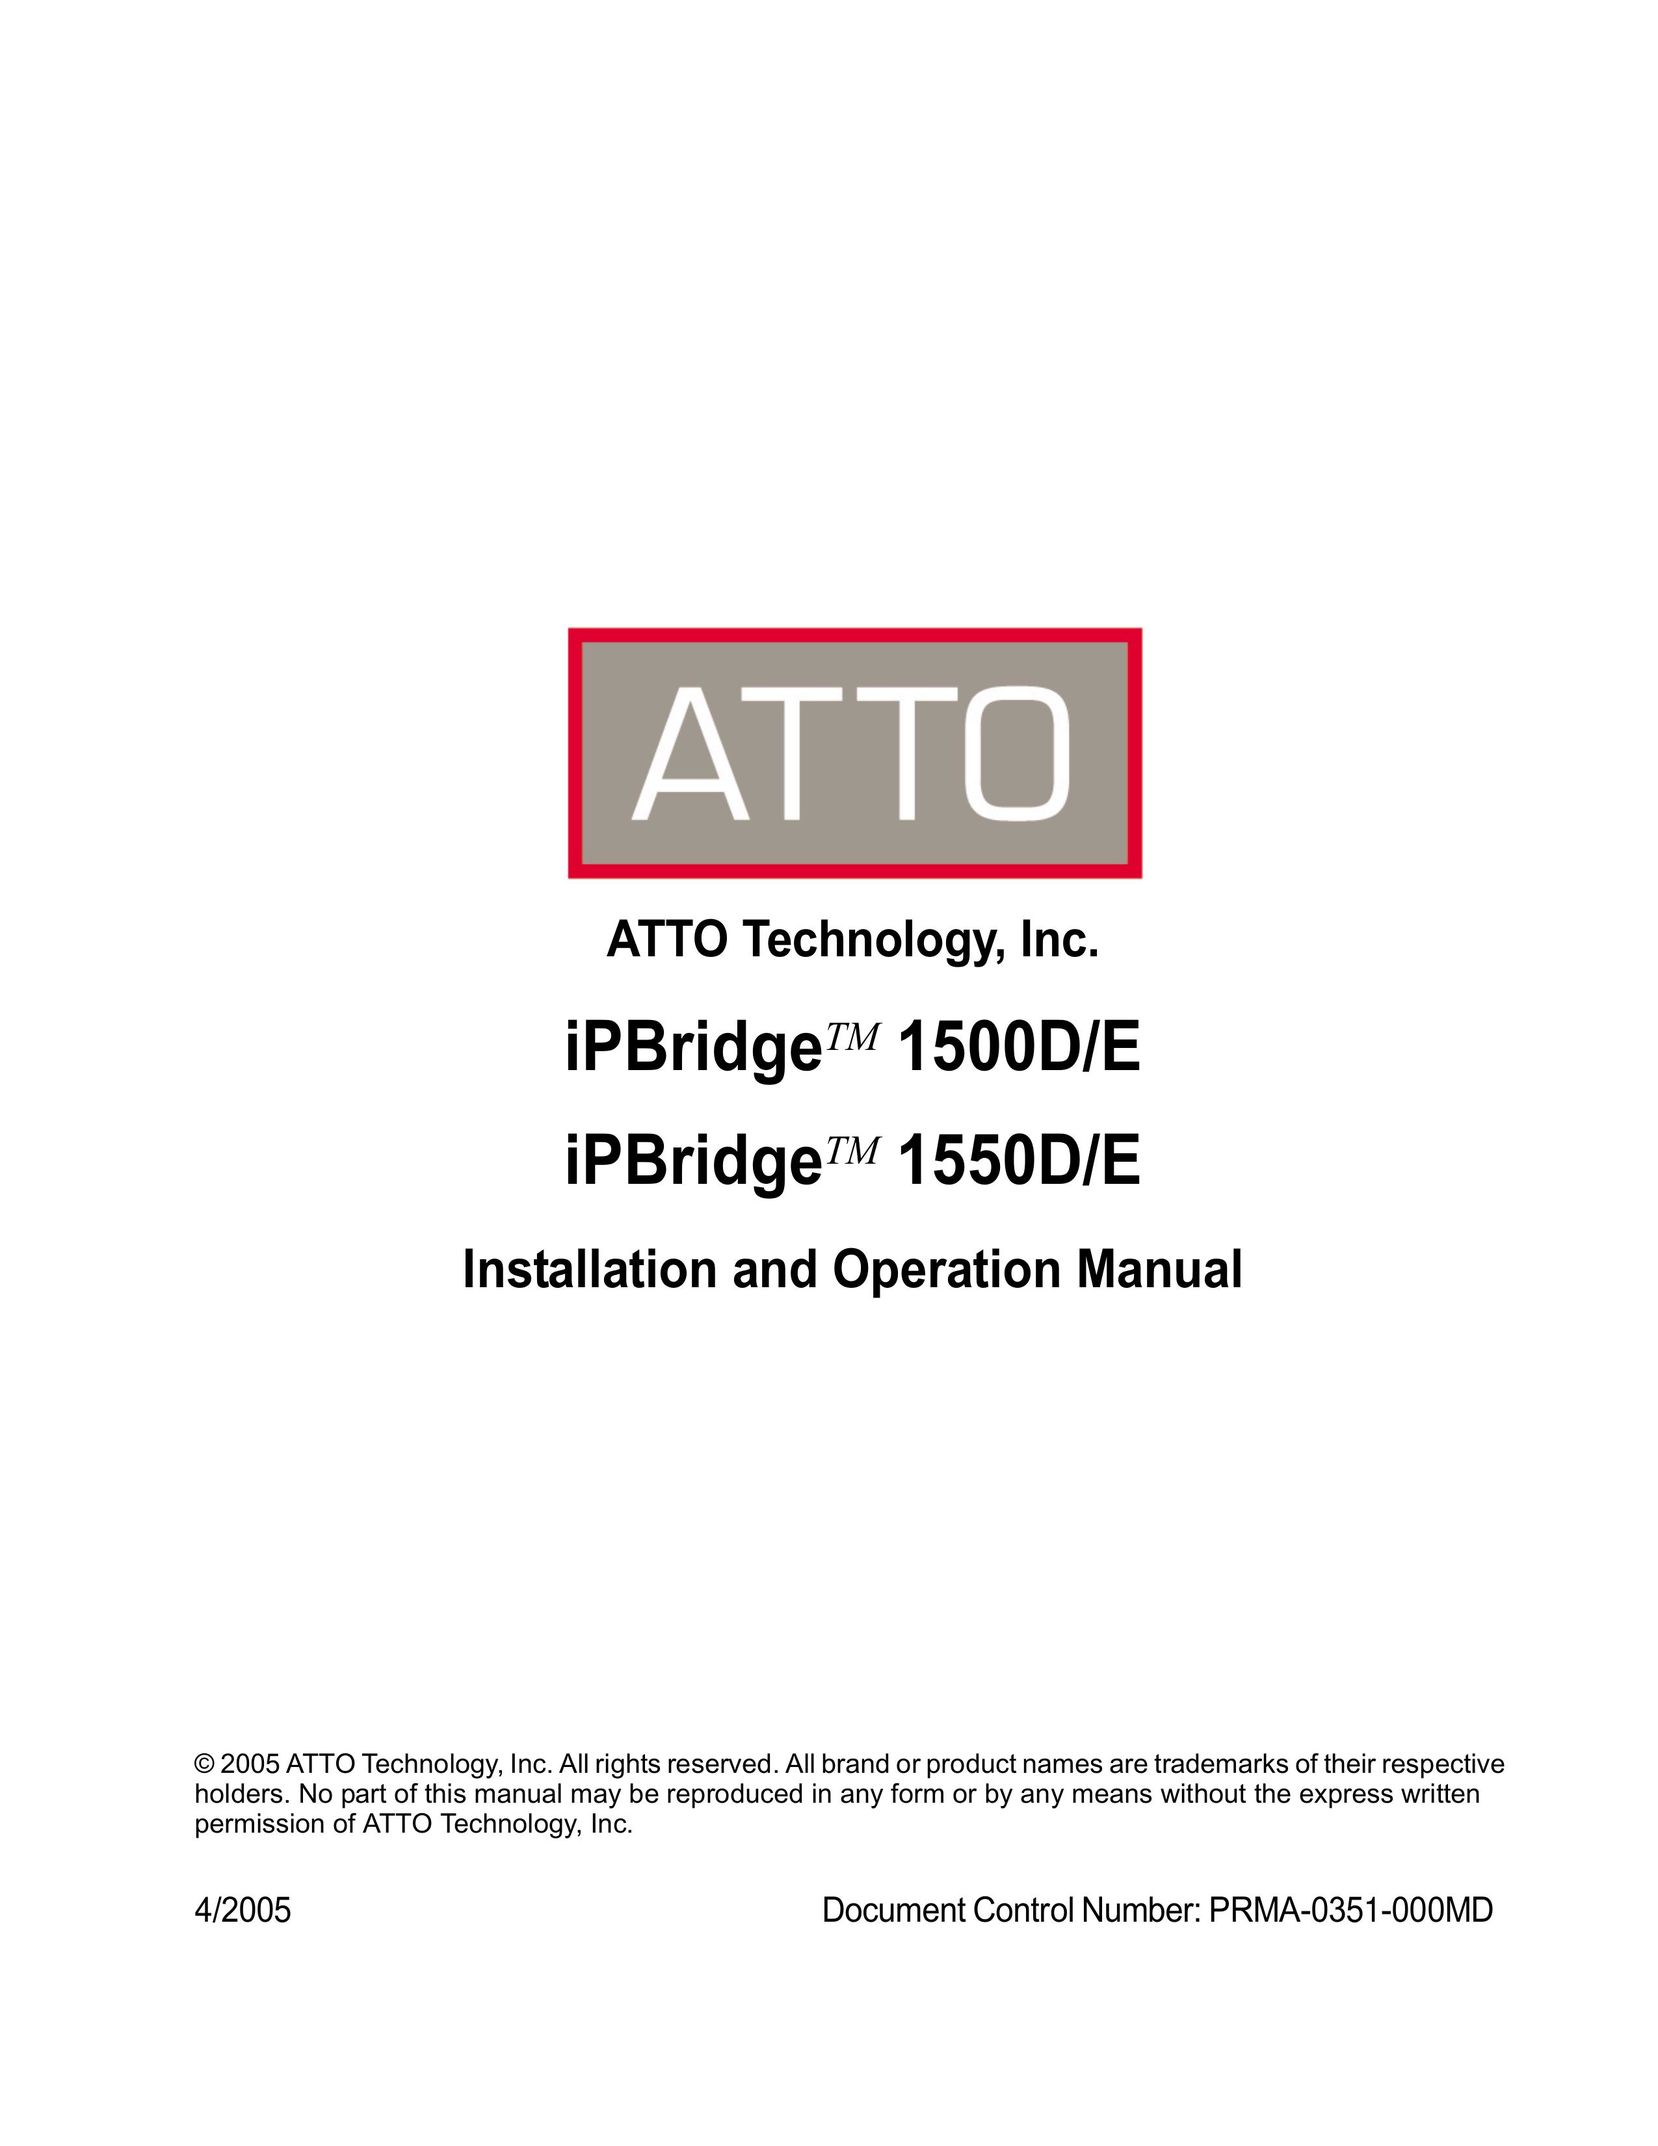 ATTO Technology 1500D/E Network Router User Manual